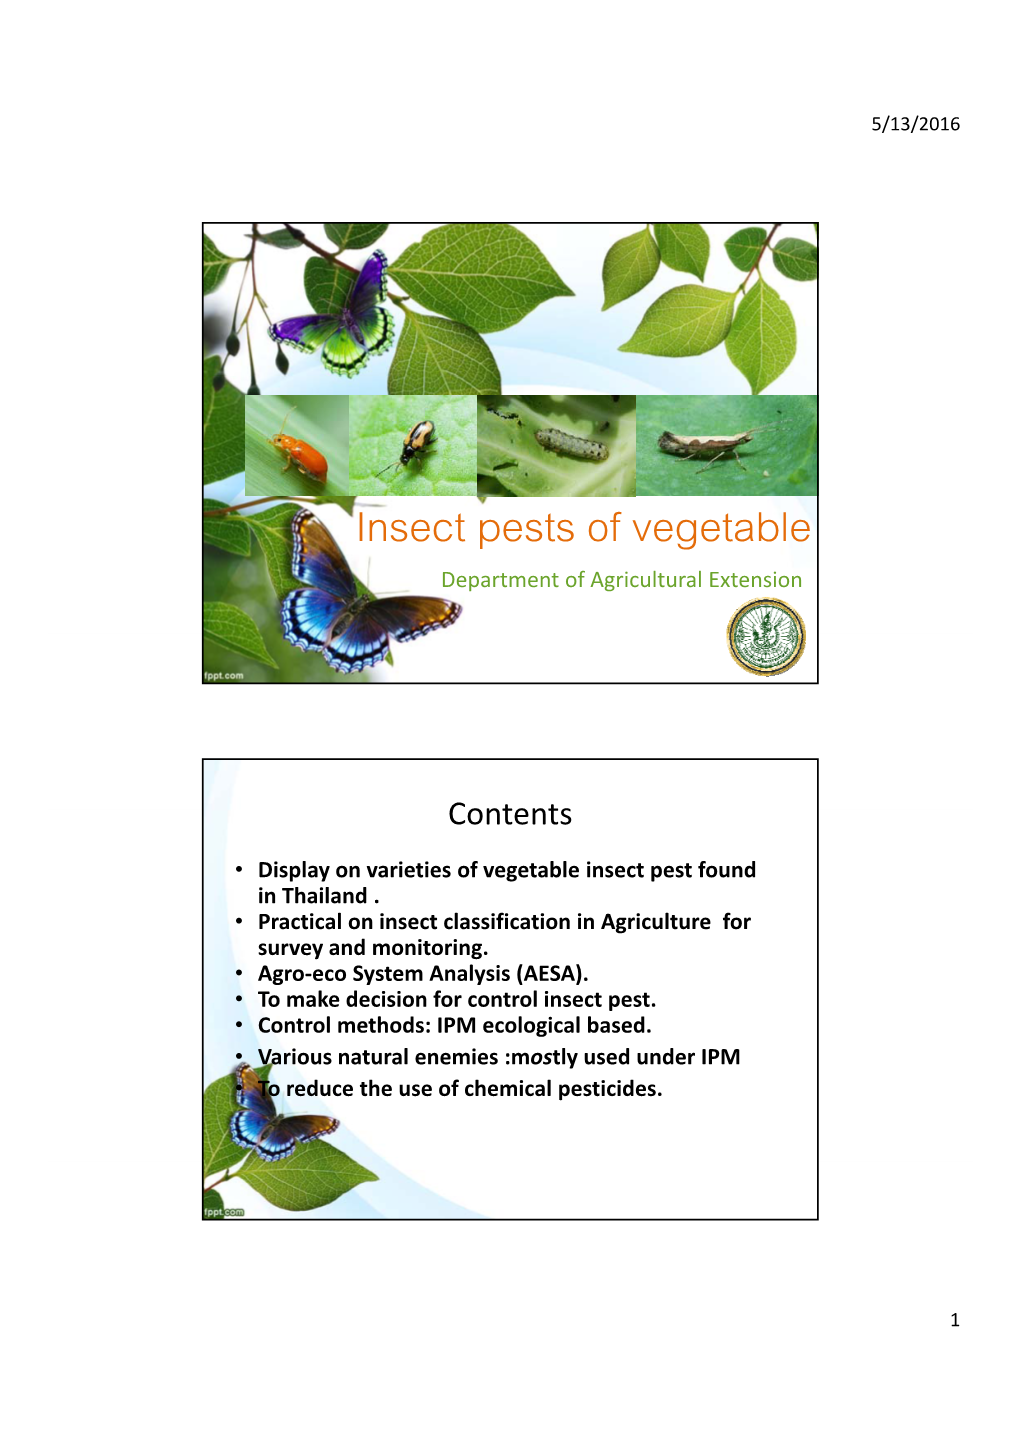 Insect Pests of Vegetable Department of Agricultural Extension